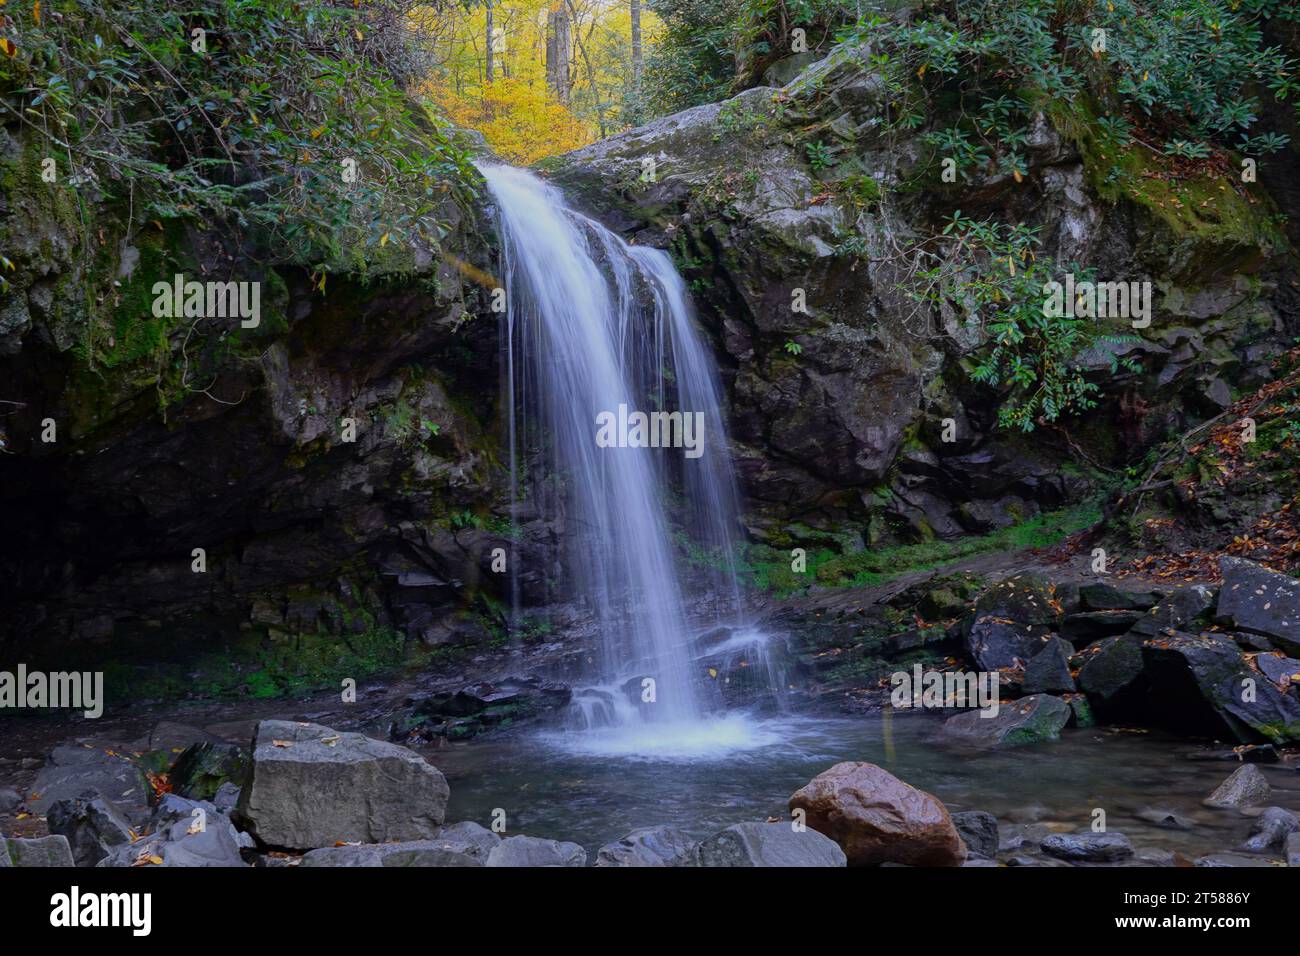 Cascate di Grotte nel Great Smoky Mountain National Park in Tennessee in autunno Foto Stock